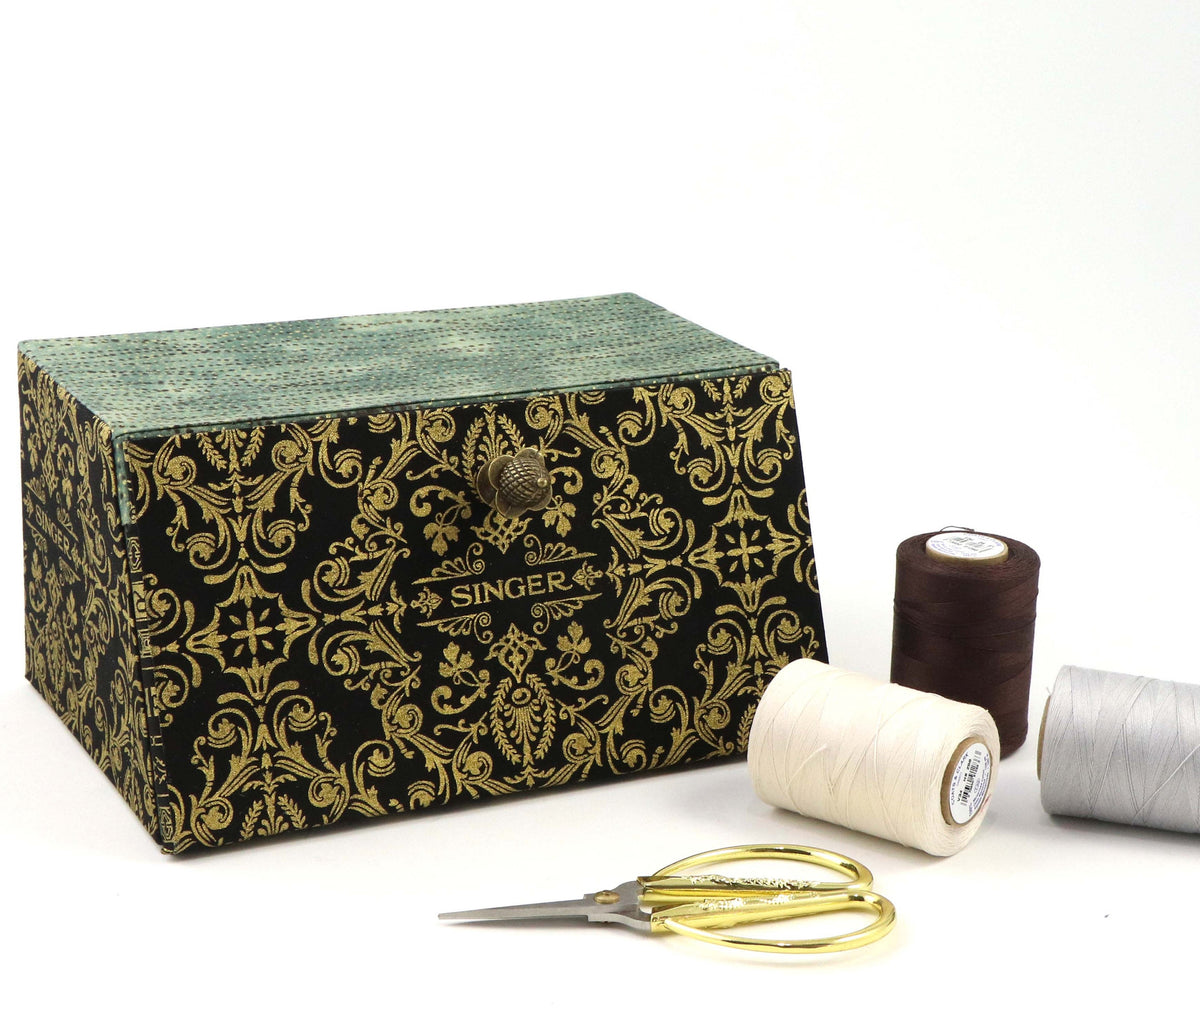 Fabric drop front box DIY kit, cartonnage kit 184, online instructions included - Colorway Arts